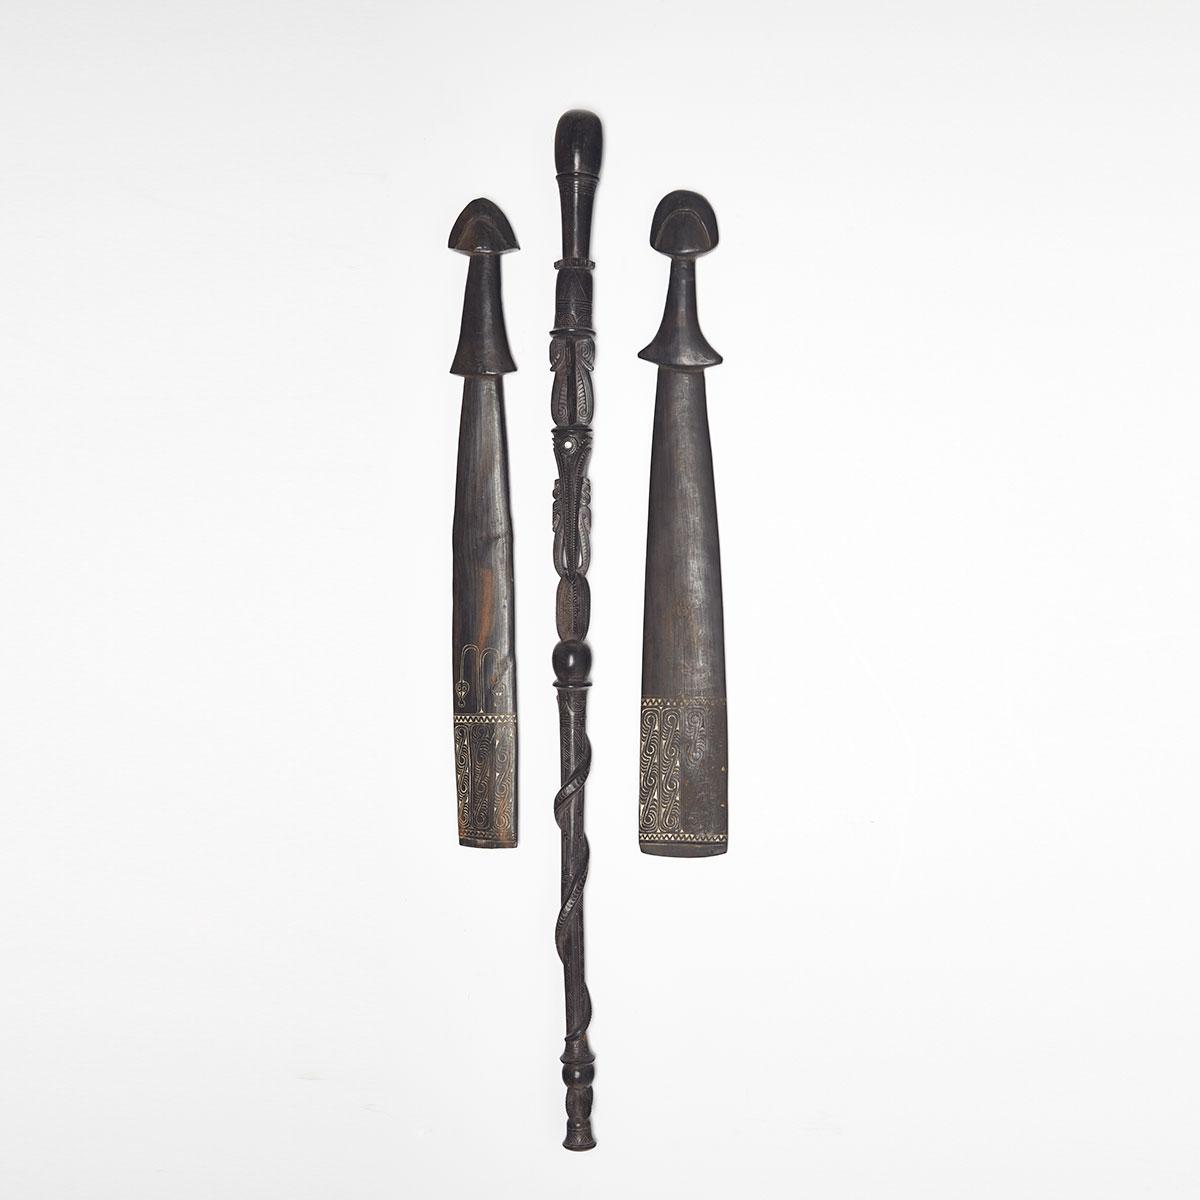 Two Papua New Guinea Trobriand Islands Massim Sword Clubs and an Orator’s Staff, early 20th century